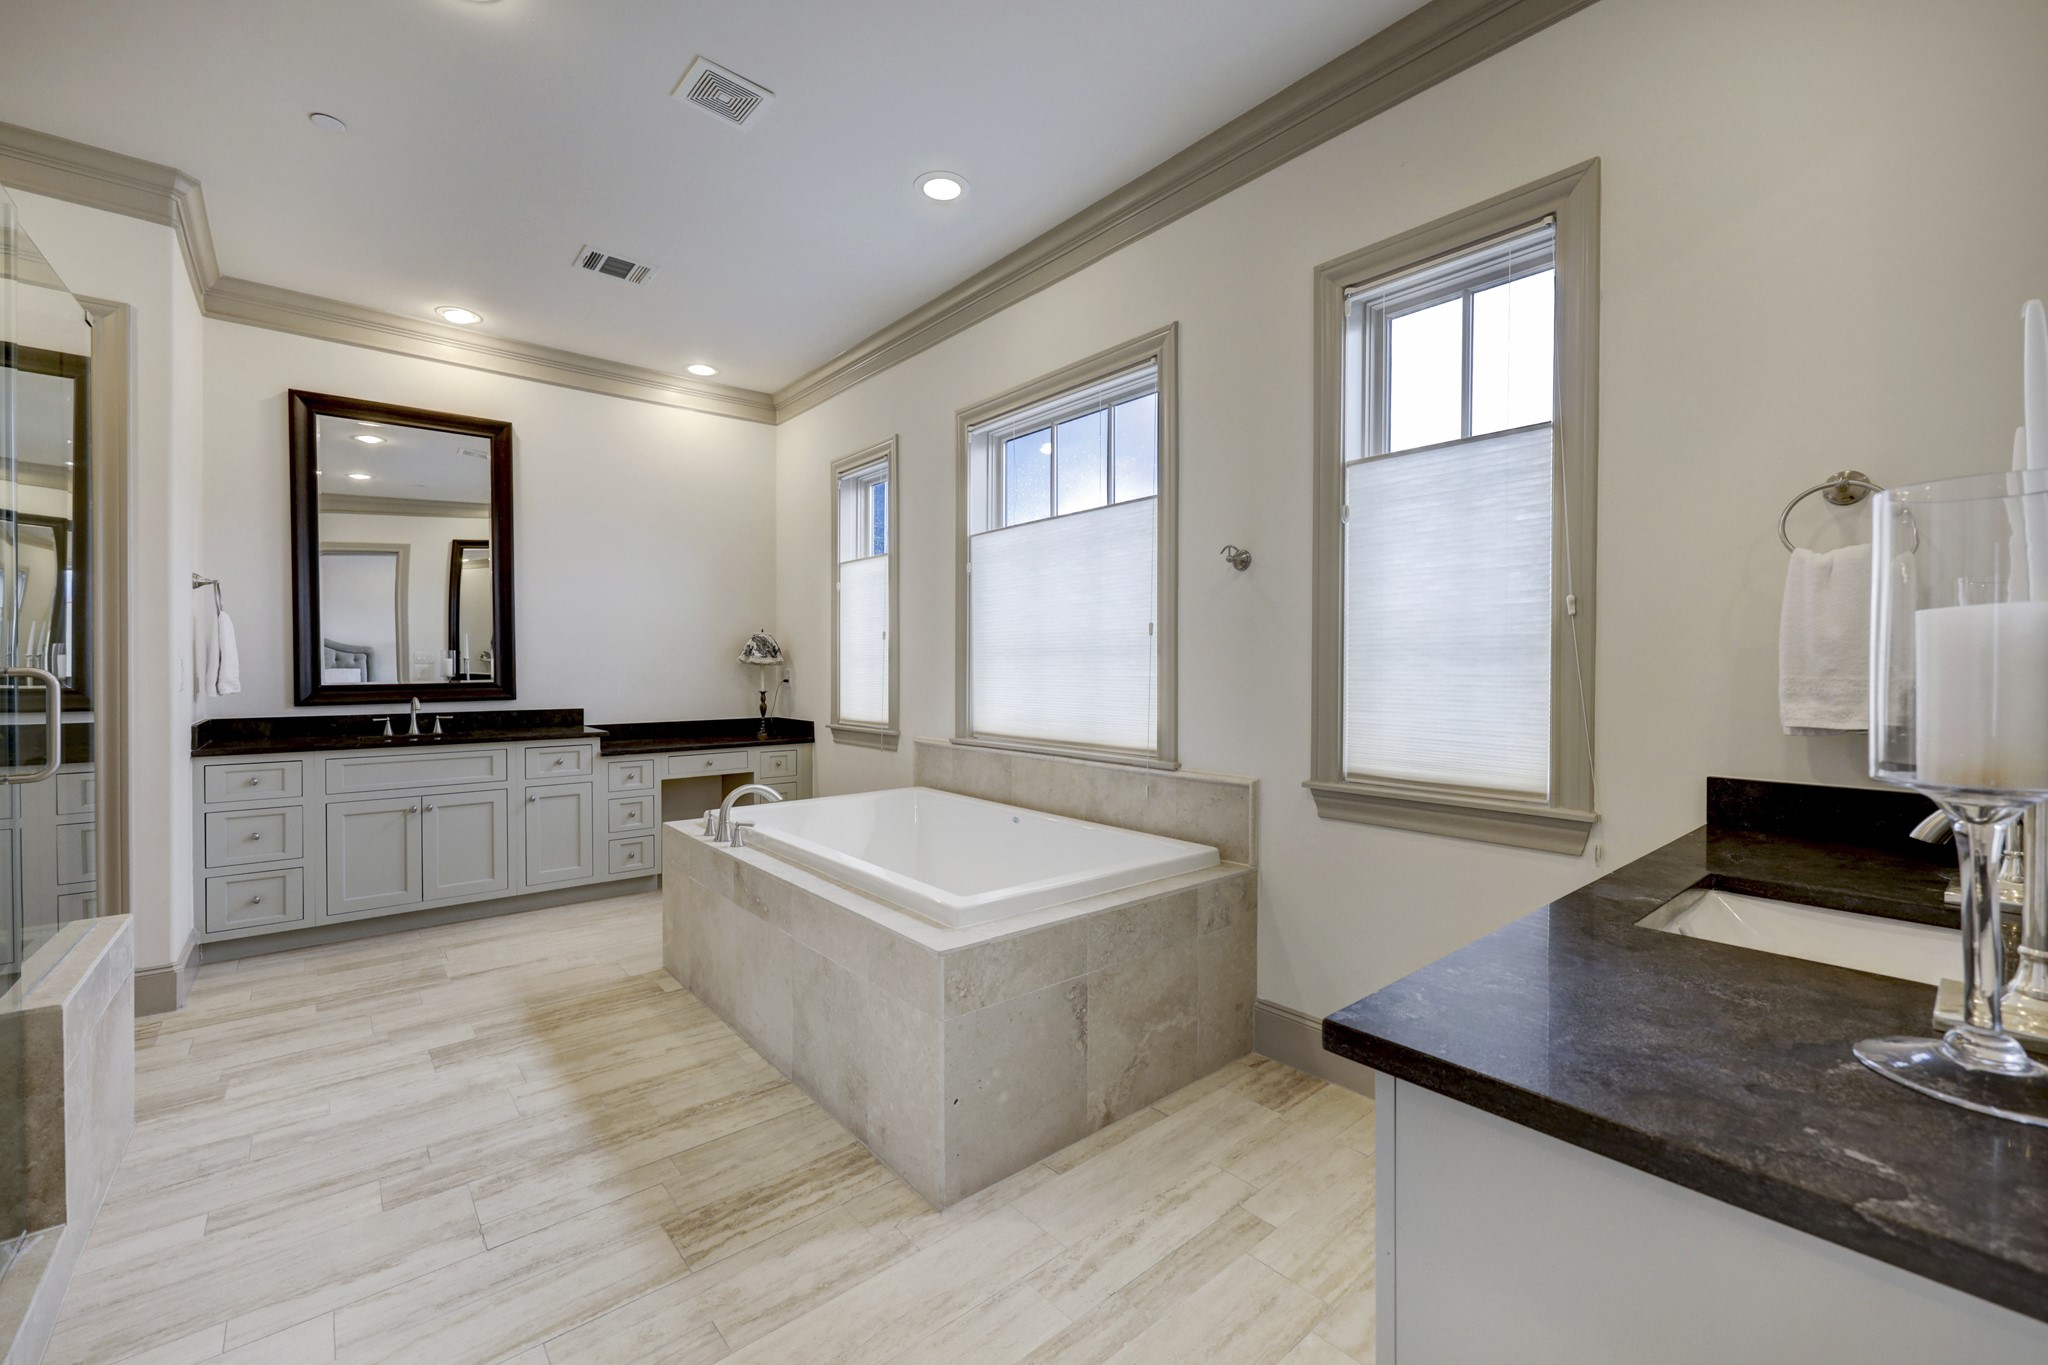 Spa like primary bath with separate vanities, large soaking tub and glass shower. Primary suite offers 2 closets.